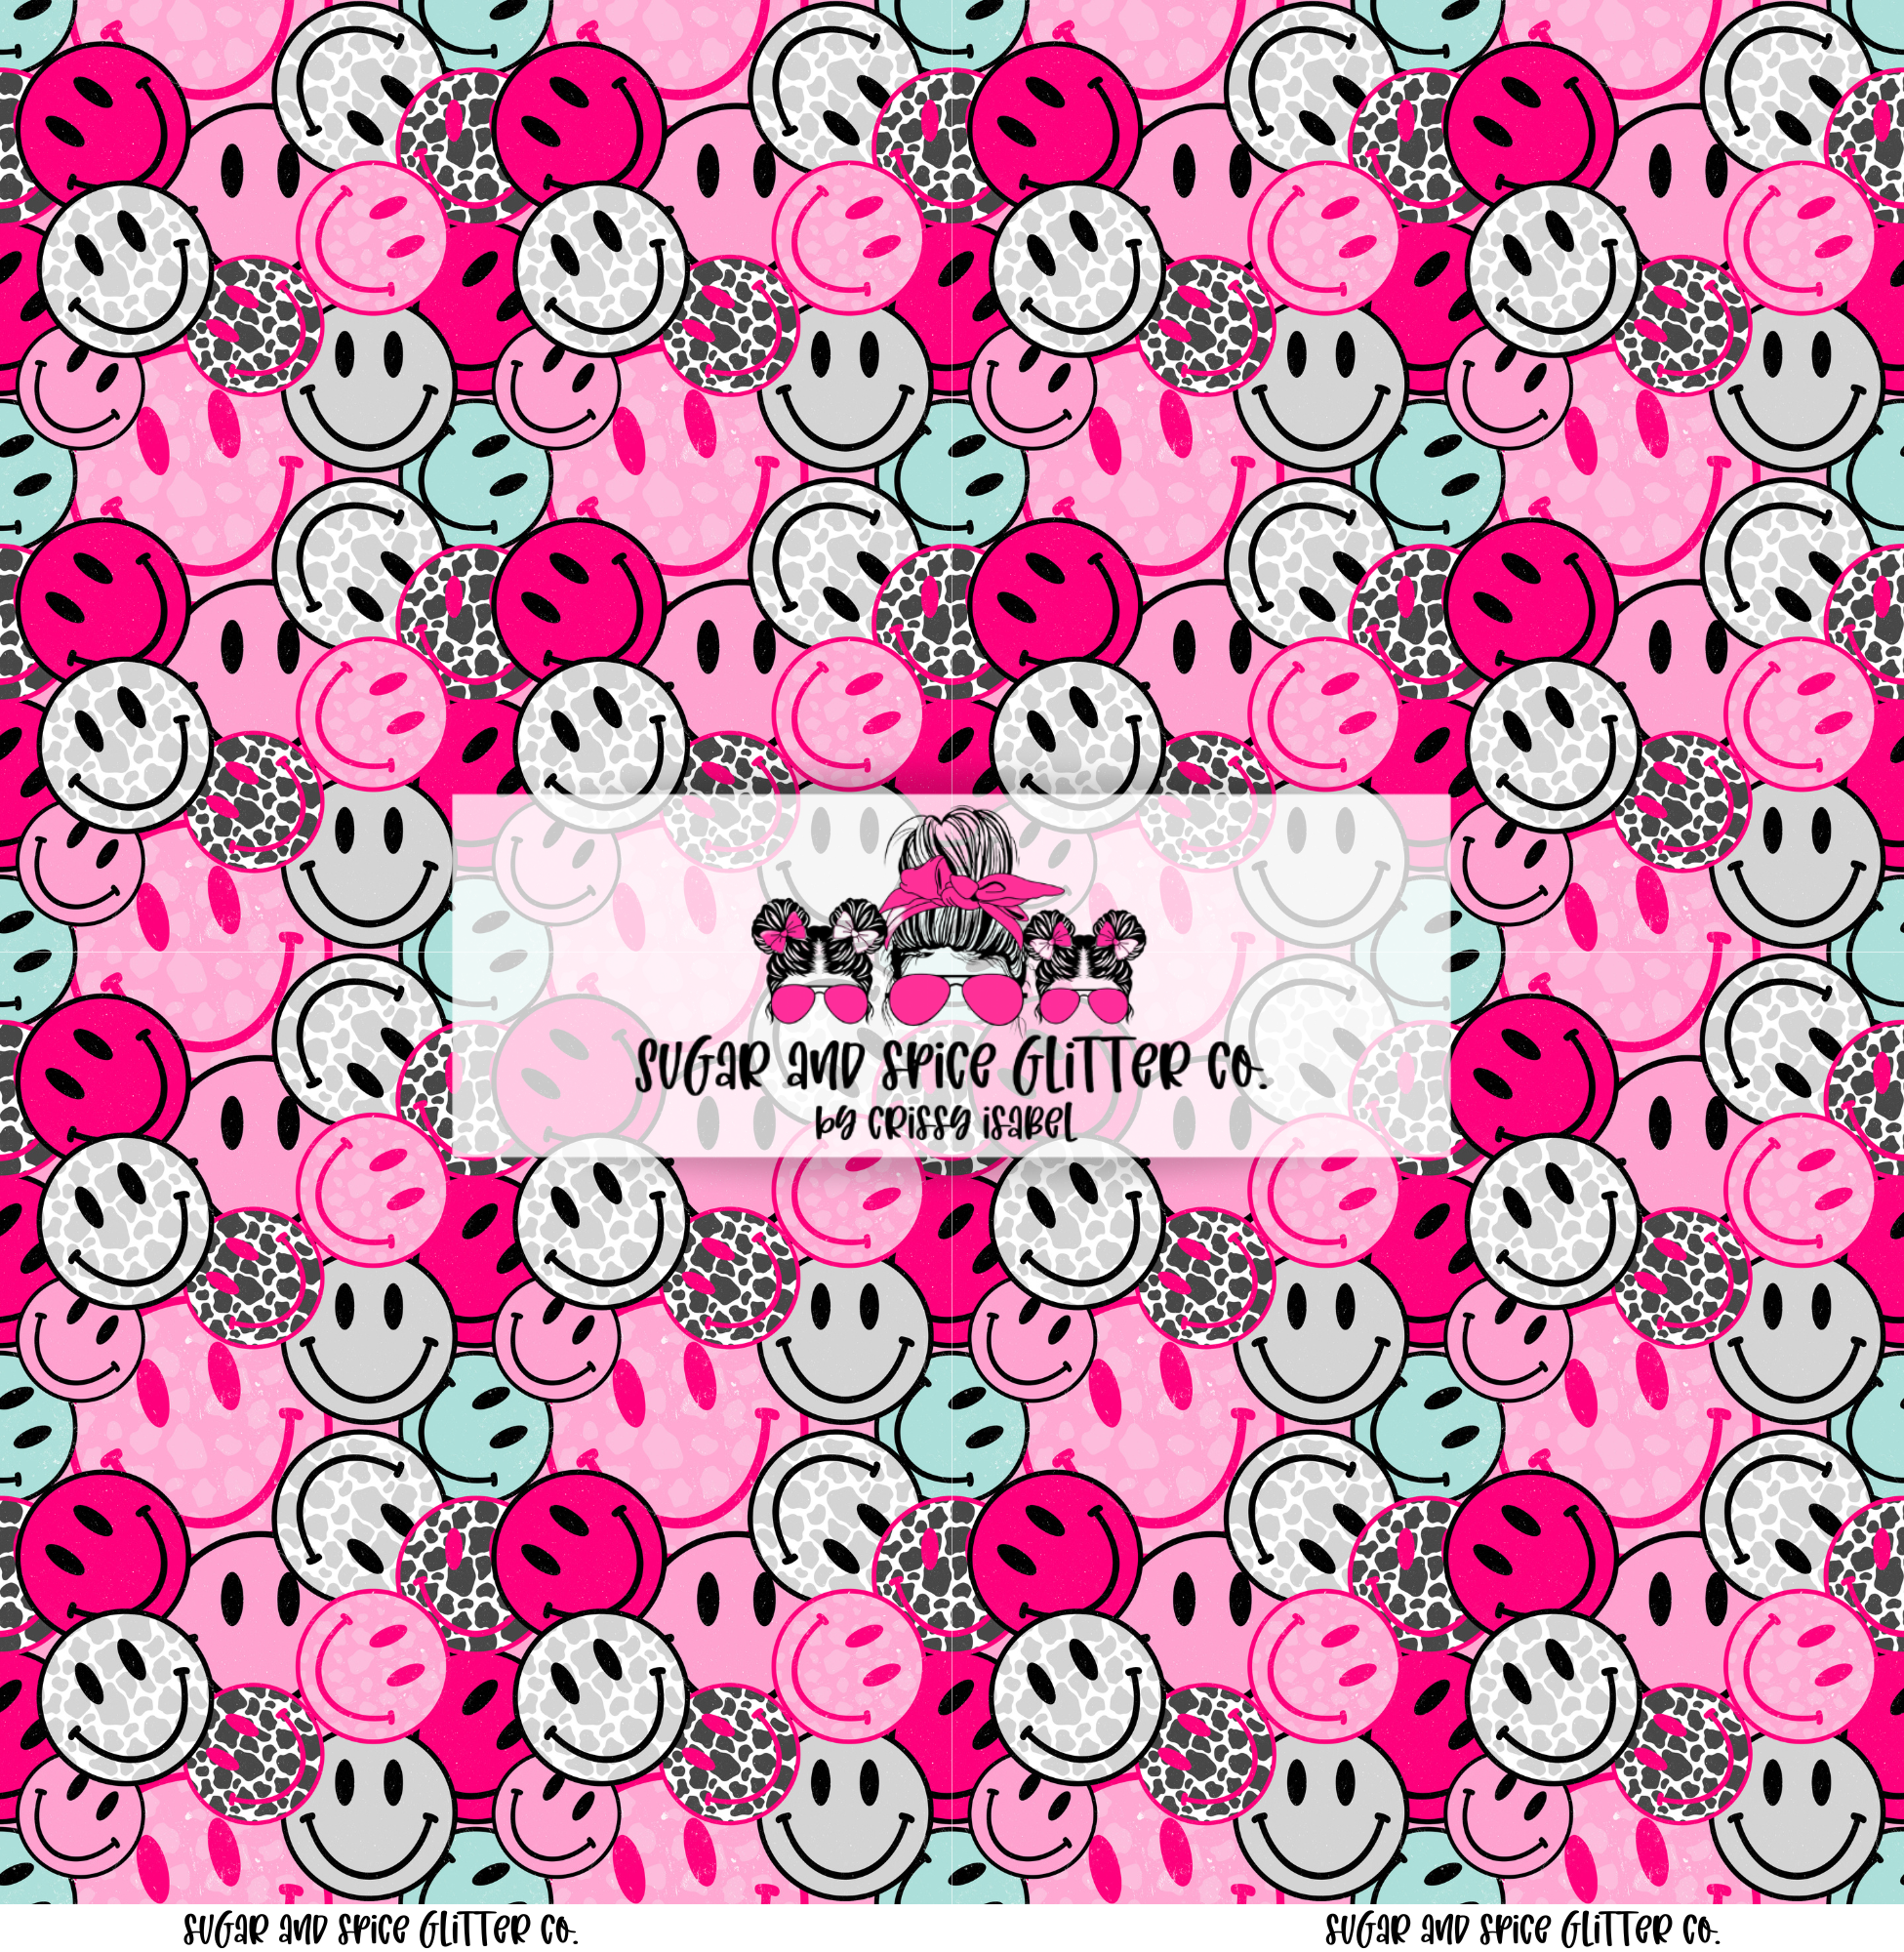 Stacked Smiley’s Patterned Vinyl 12x12 sheets